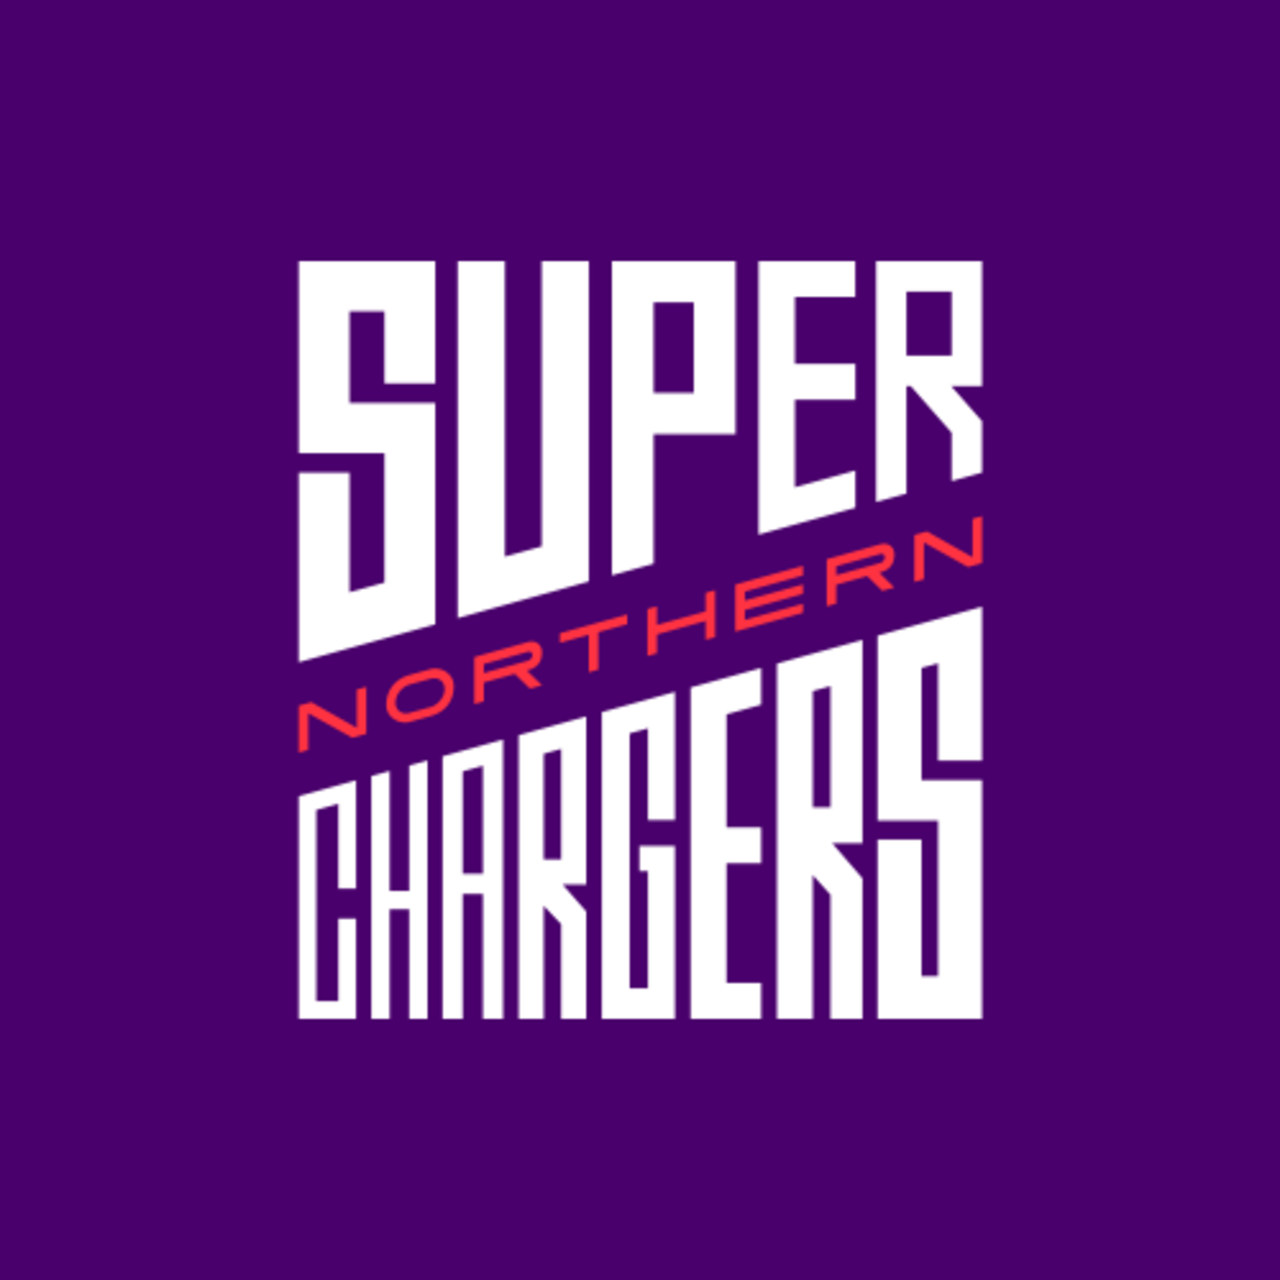 Super Northern Chargers team logo